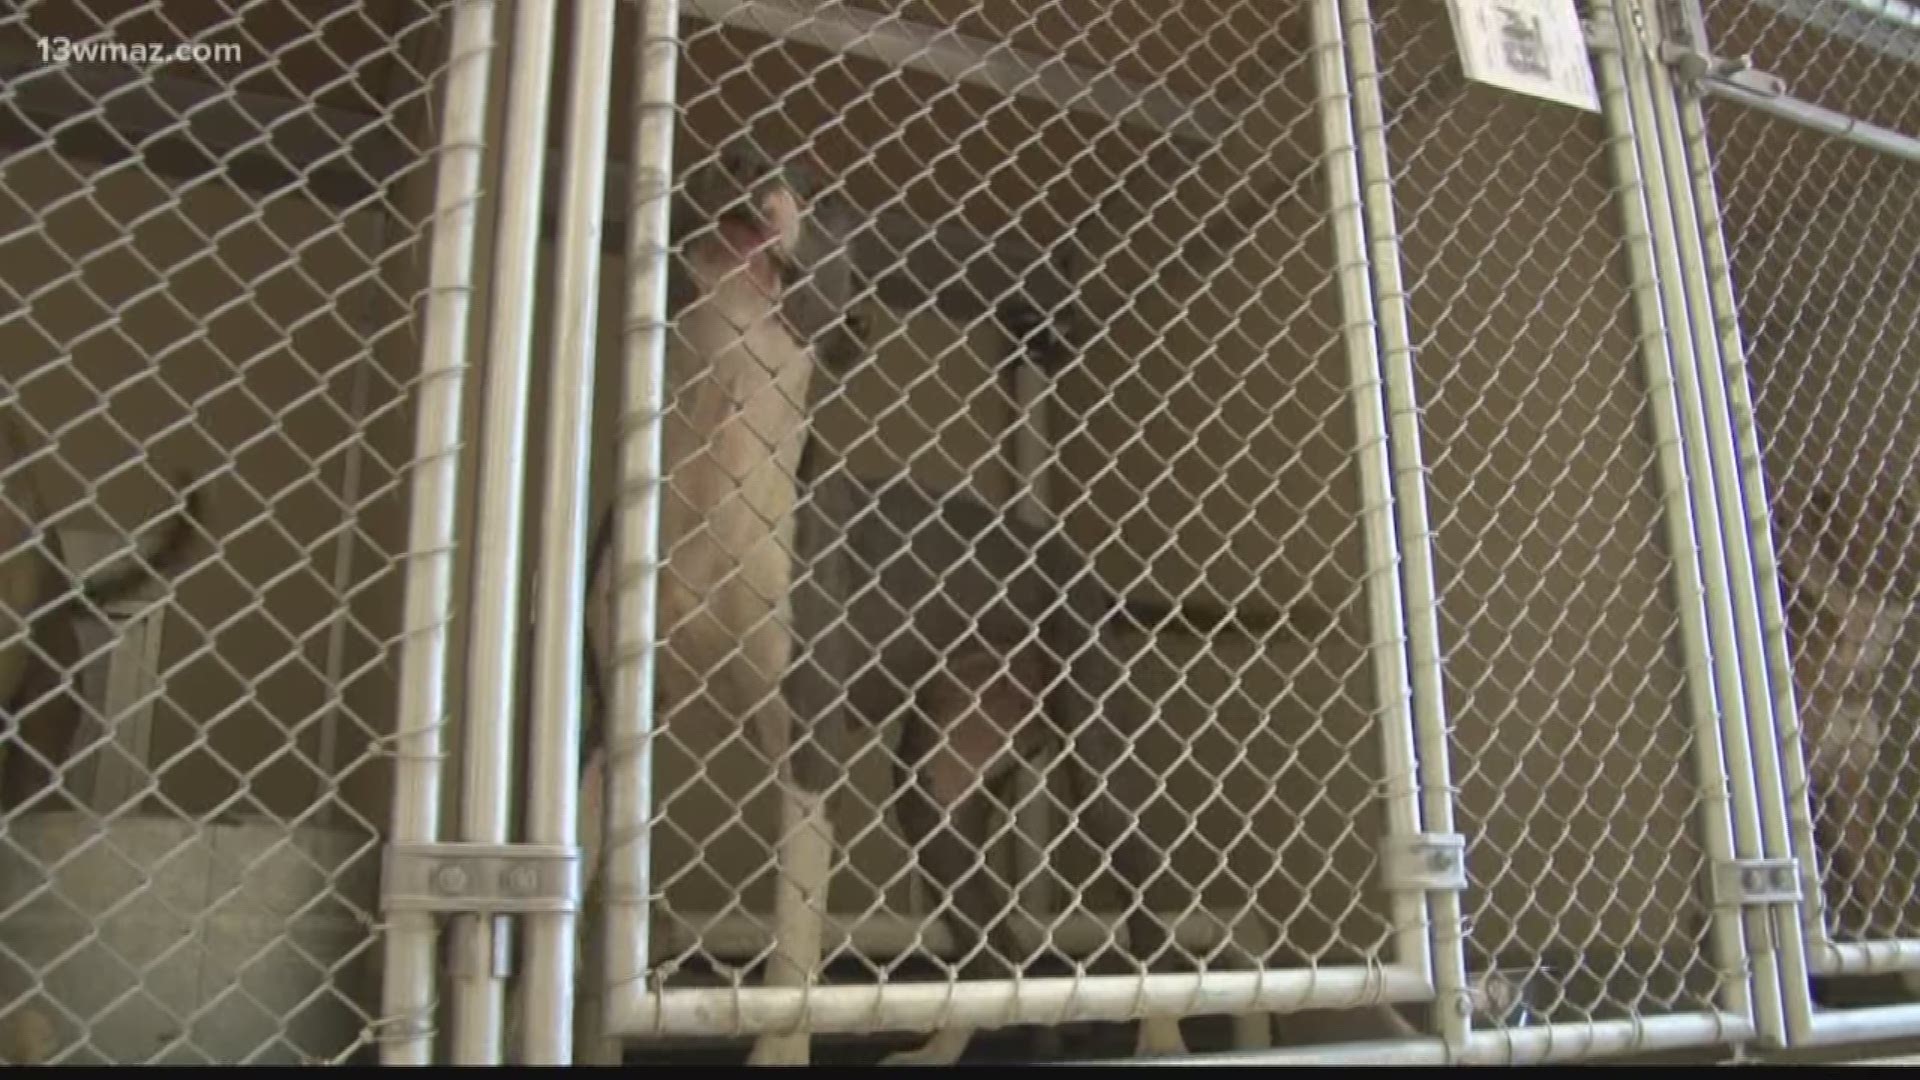 The county says they're waiting on the Department of Agriculture to schedule a tour and clear them of those violations before they can accept more animals.